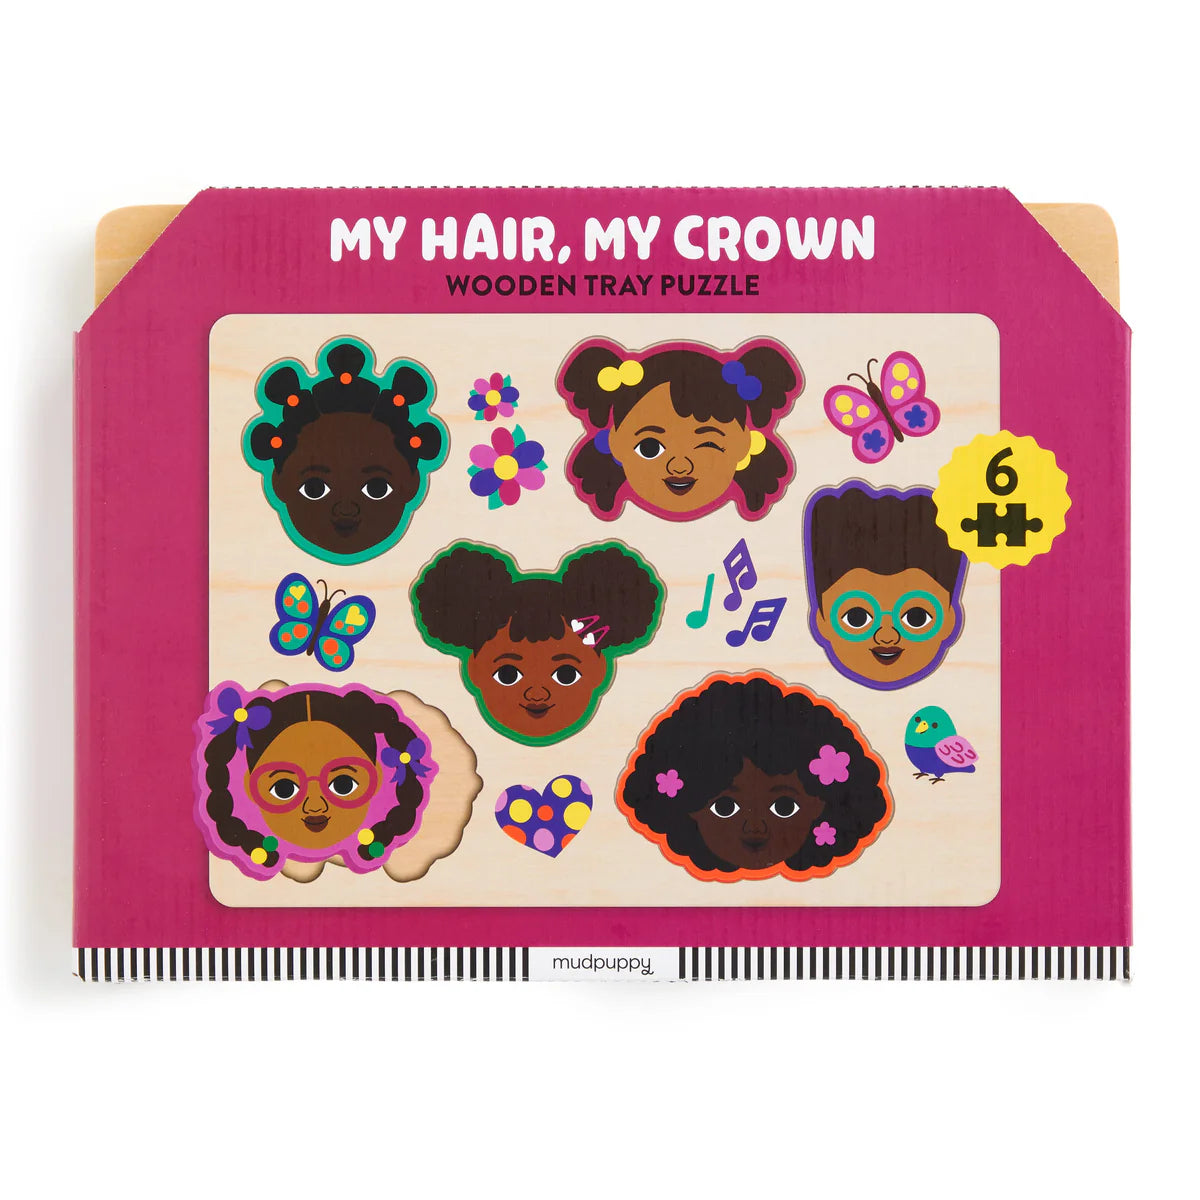 My Hair, My Crown // Wooden Tray Puzzle